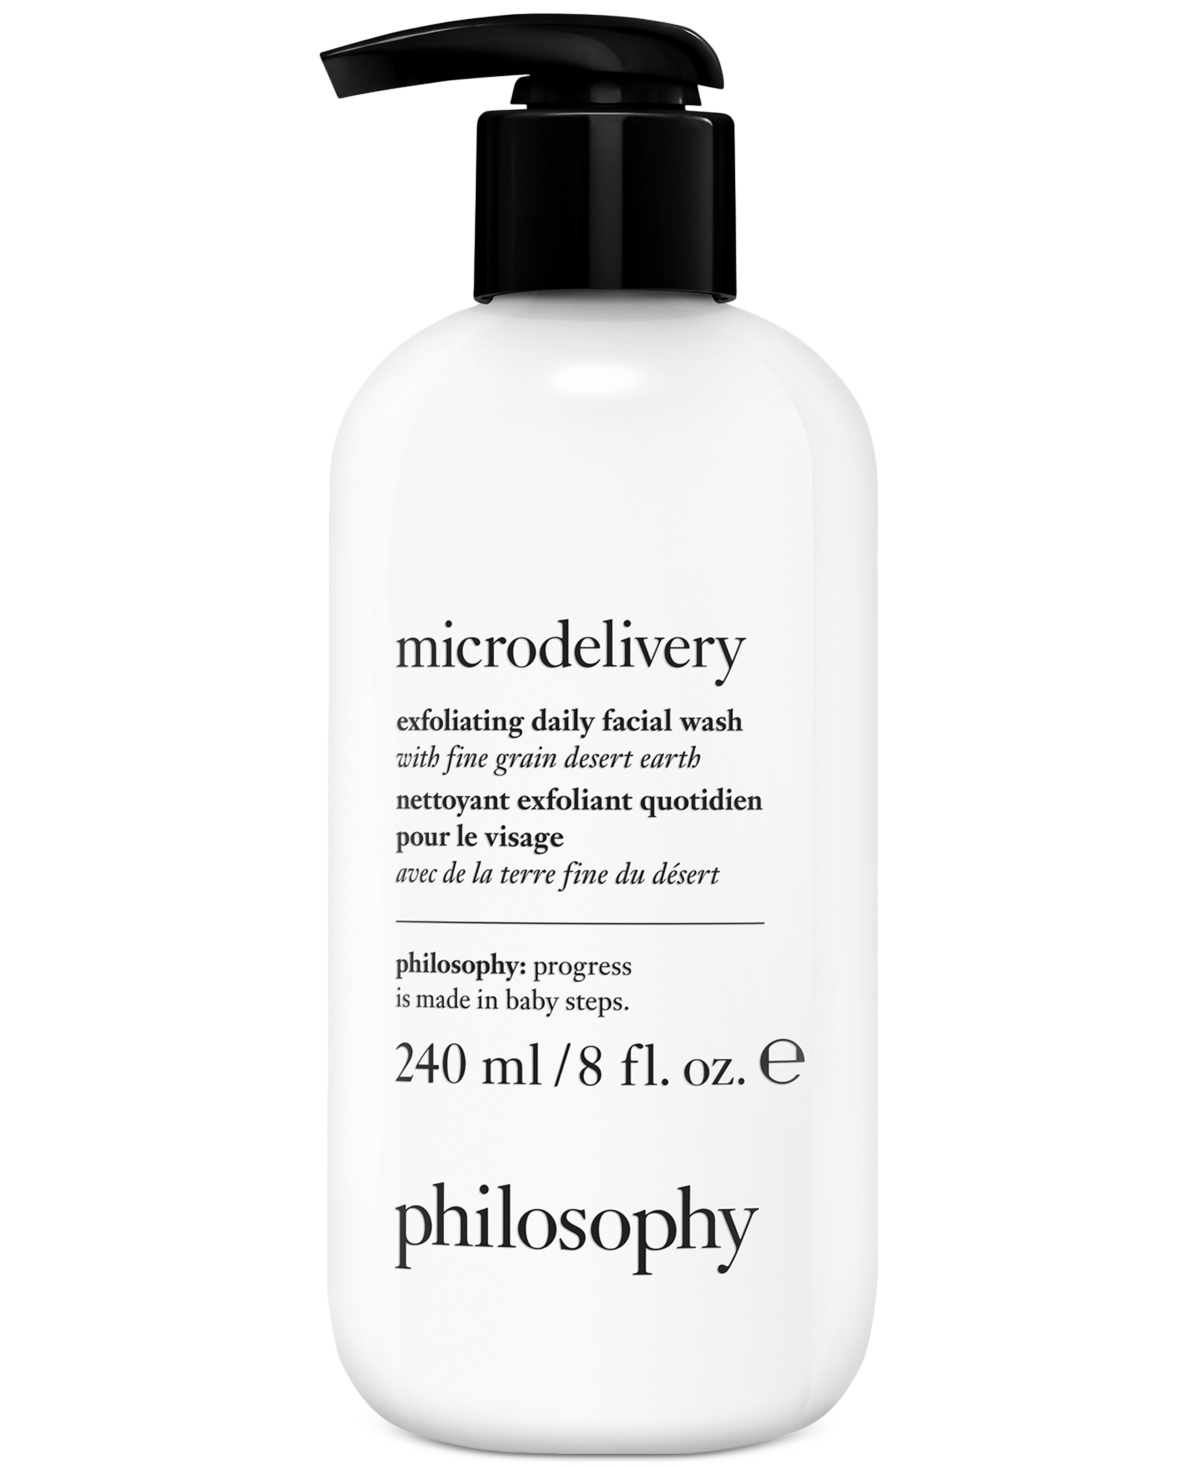 Microdelivery Exfoliating Daily Facial Wash, 8 oz.